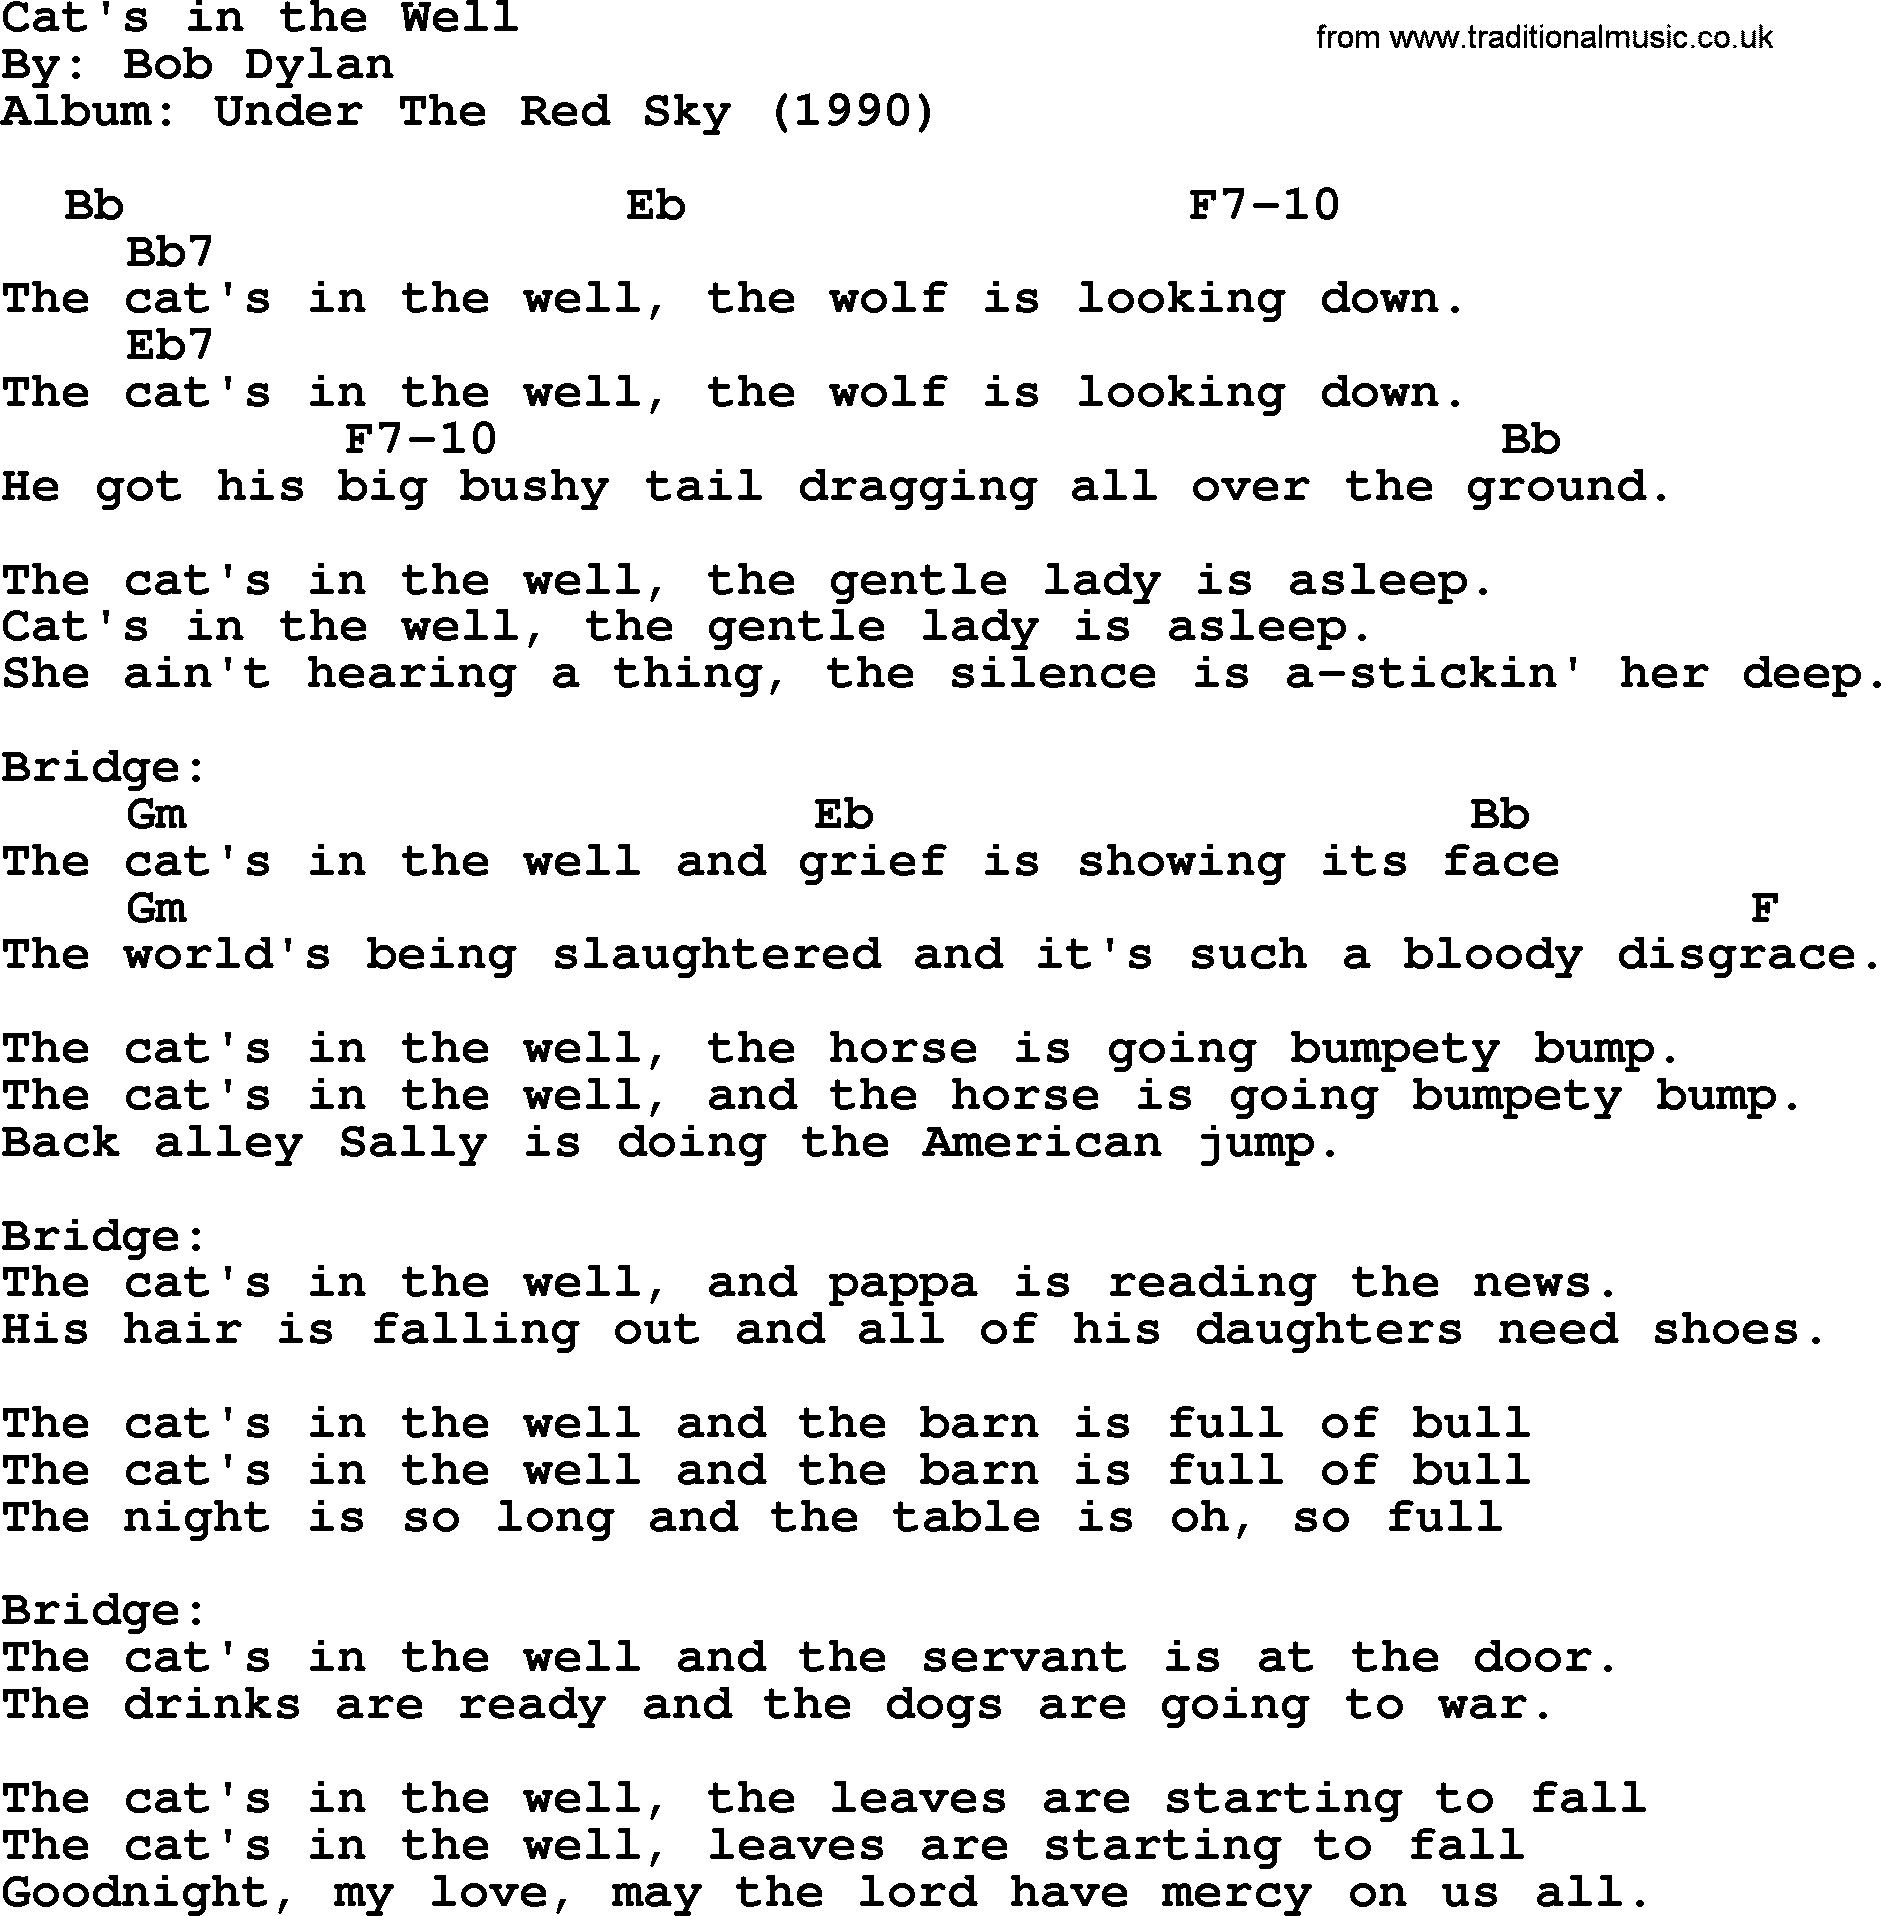 Bob Dylan song, lyrics with chords - Cat's in the Well